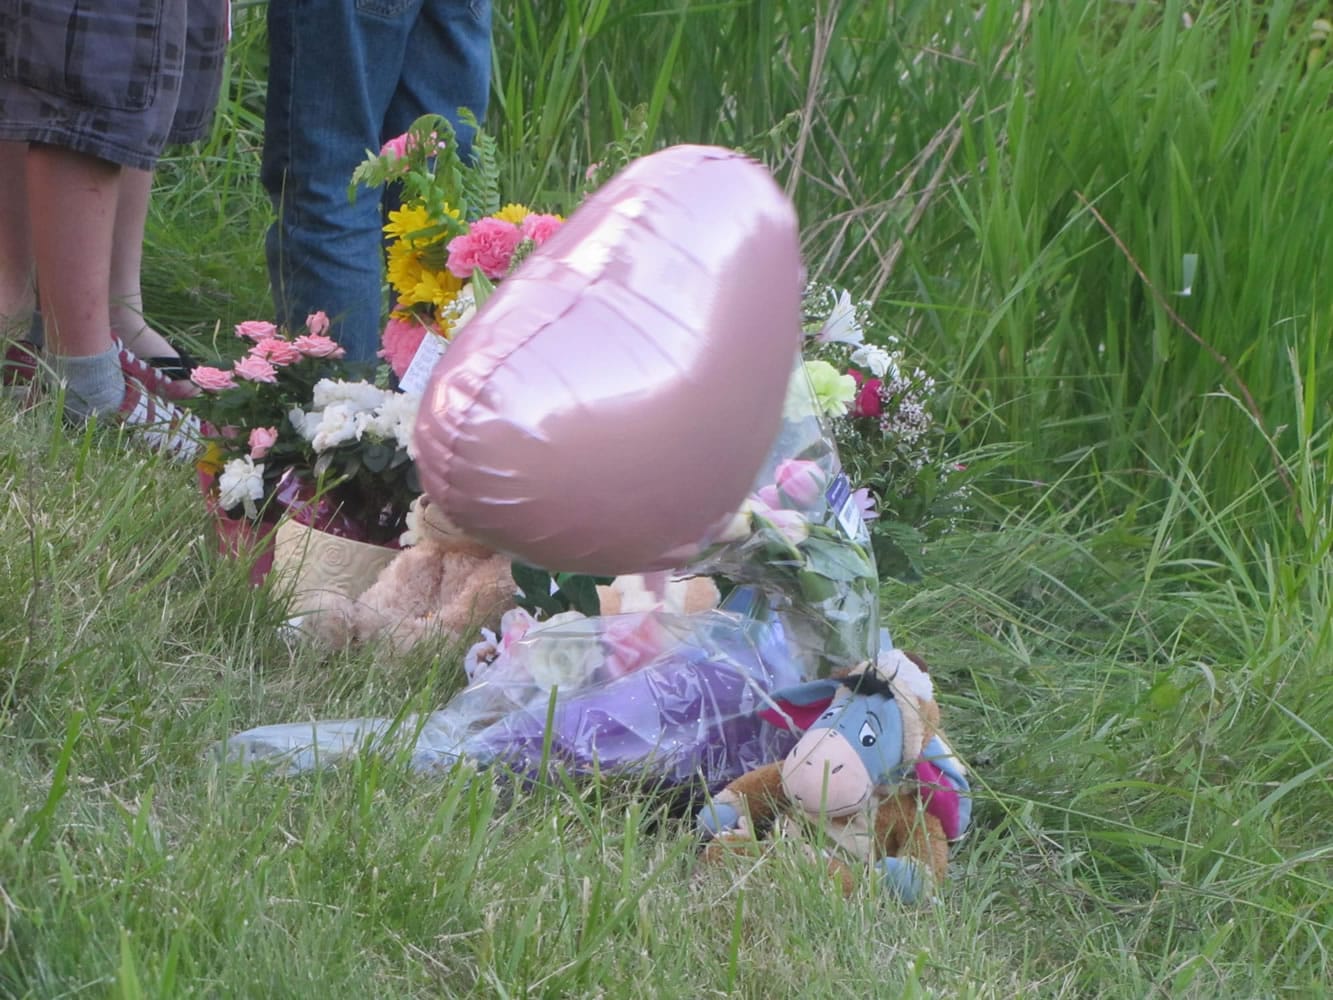 Mourners placed flowers, stuffed animals and a balloon Saturday night off S.W. 10th Avenue near the site where 22-year-old Tatyana Tupikova's body was found the previous day.